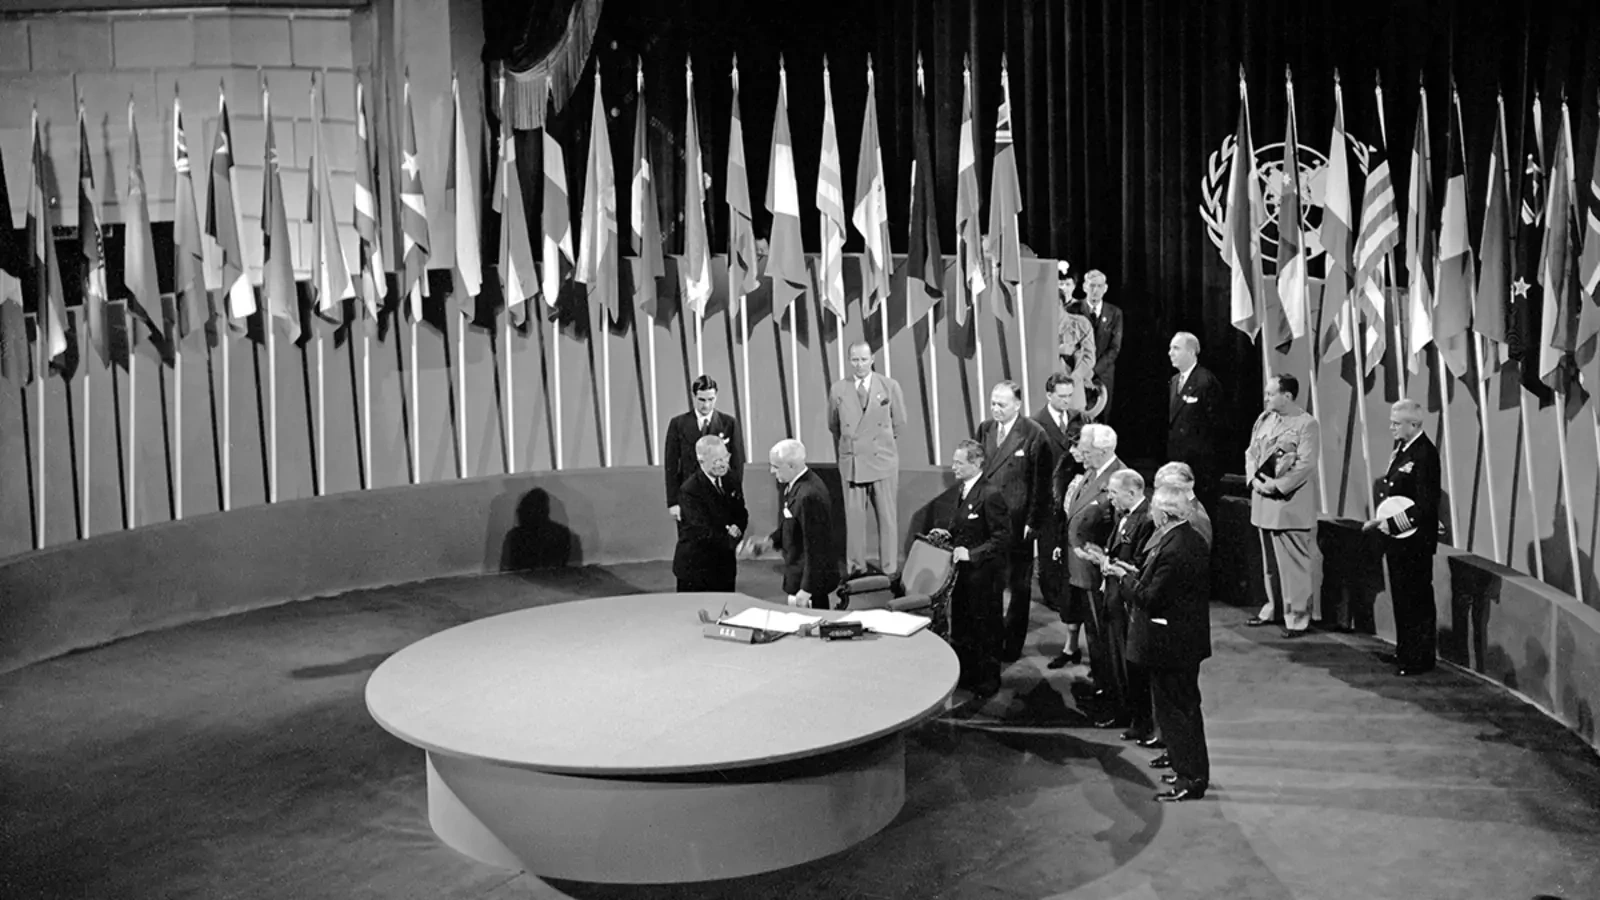 U.S. President Harry S. Truman and Secretary of State Edward R. Stettinius, Jr., shake hands at the signing of the United Nations Charter in 1945.